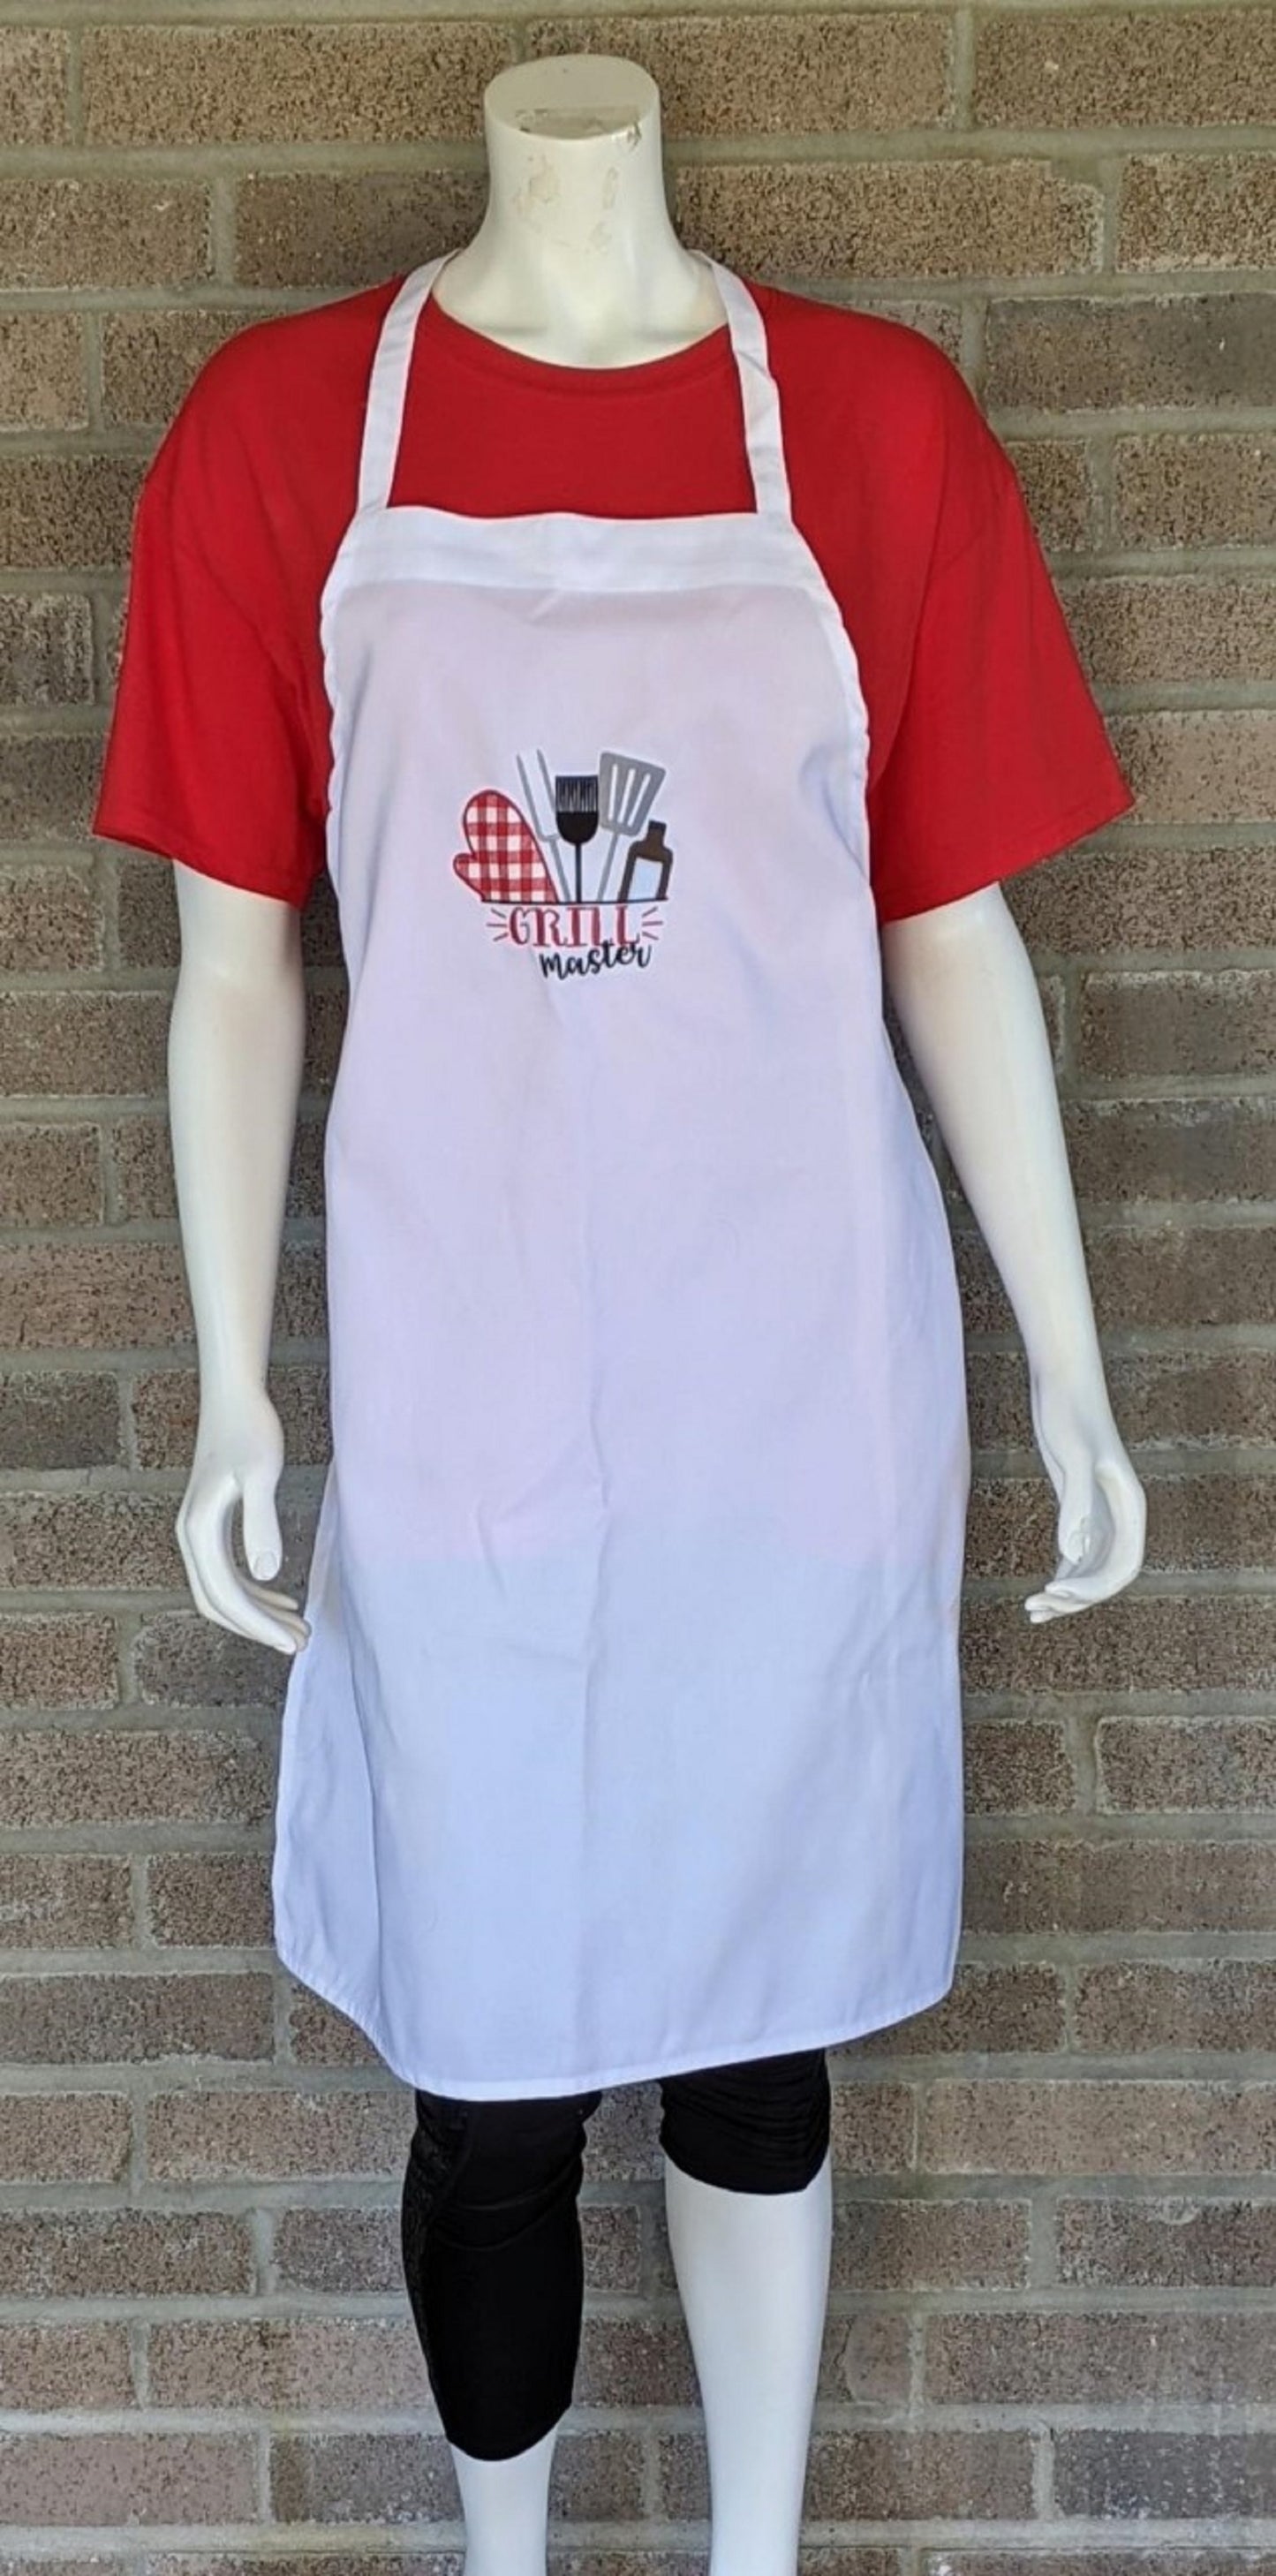 Grill Master Apron-Applique and Embroidery with Grilling Tools